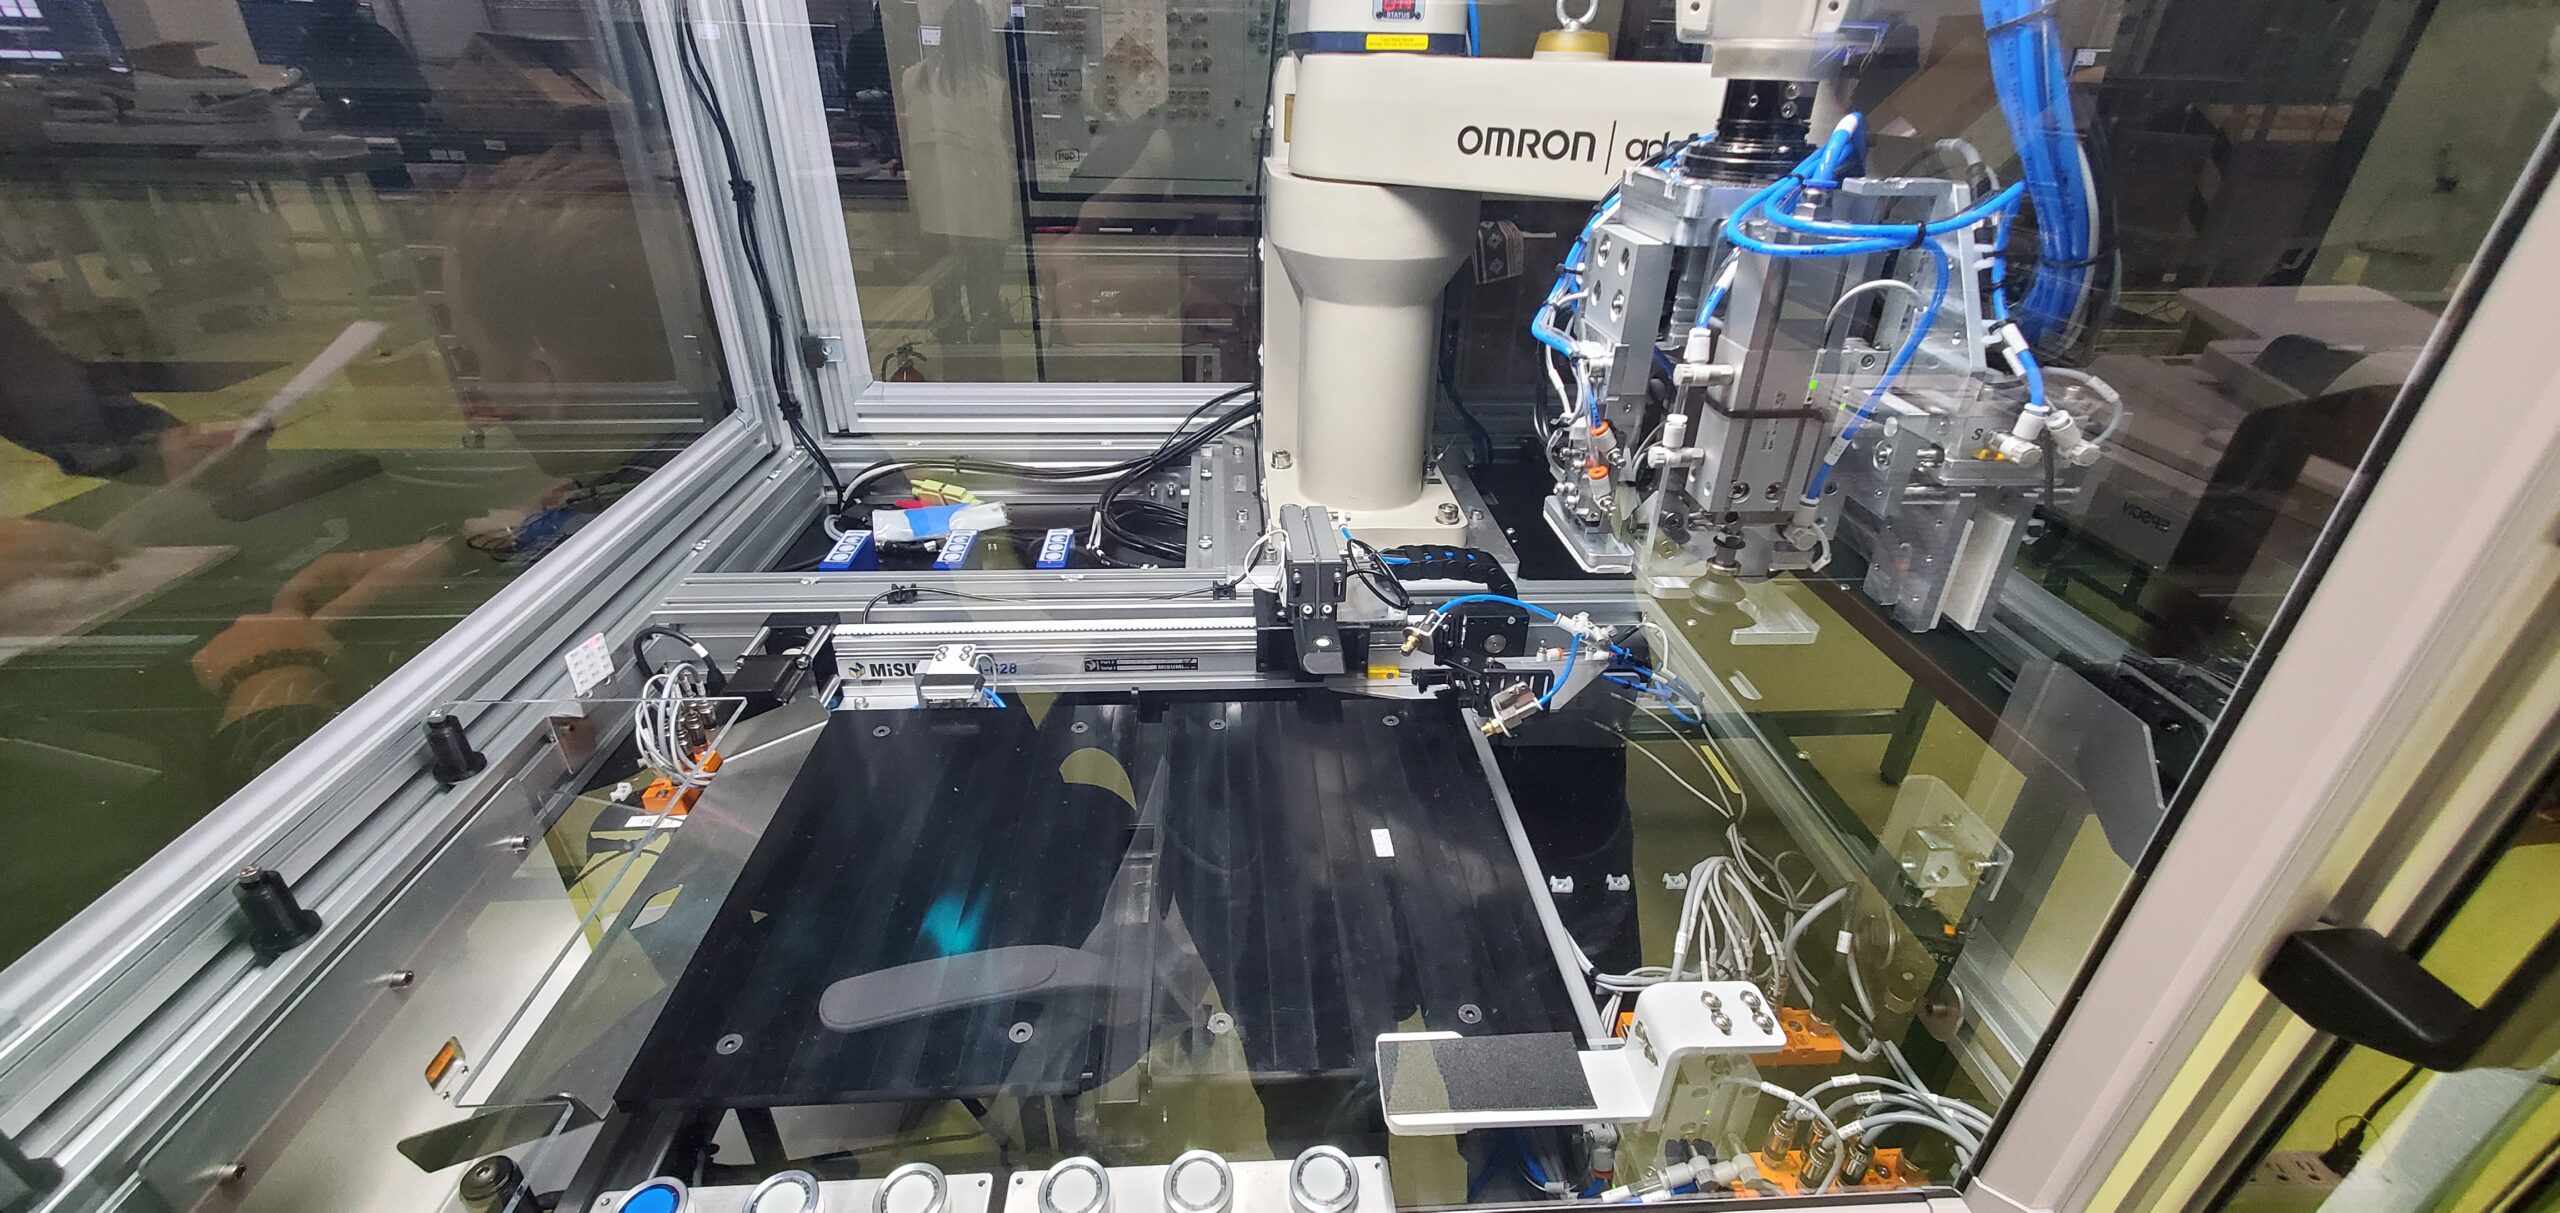 Automated Book Scanning Robot